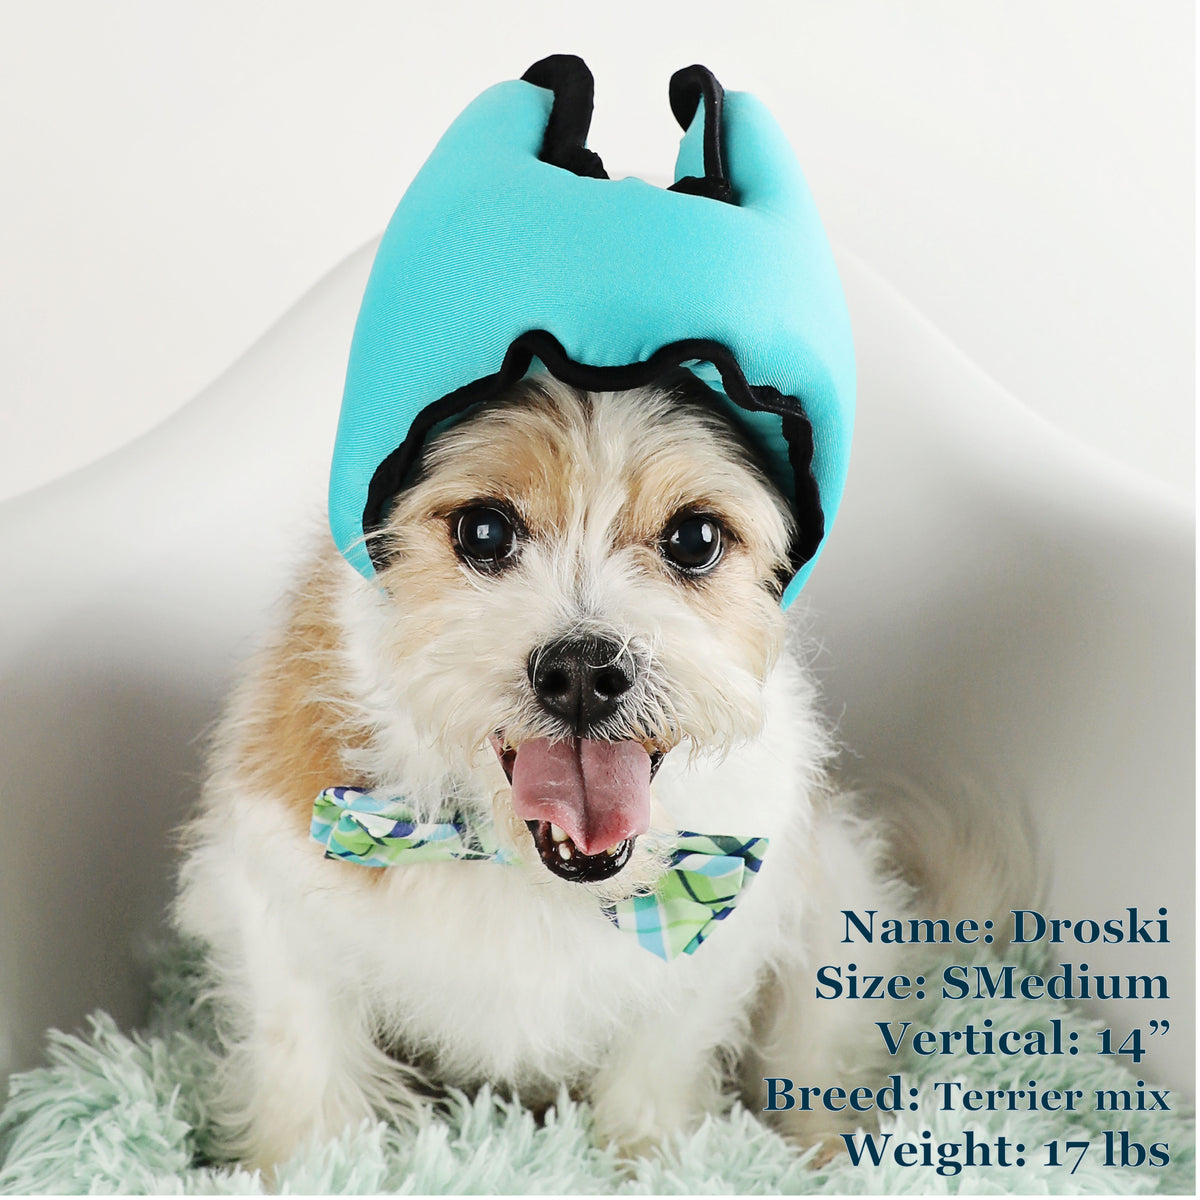 Droski is a Terrier Mix in a SMedium Blue PAWNIX Noise Cancelling Headset for dogs